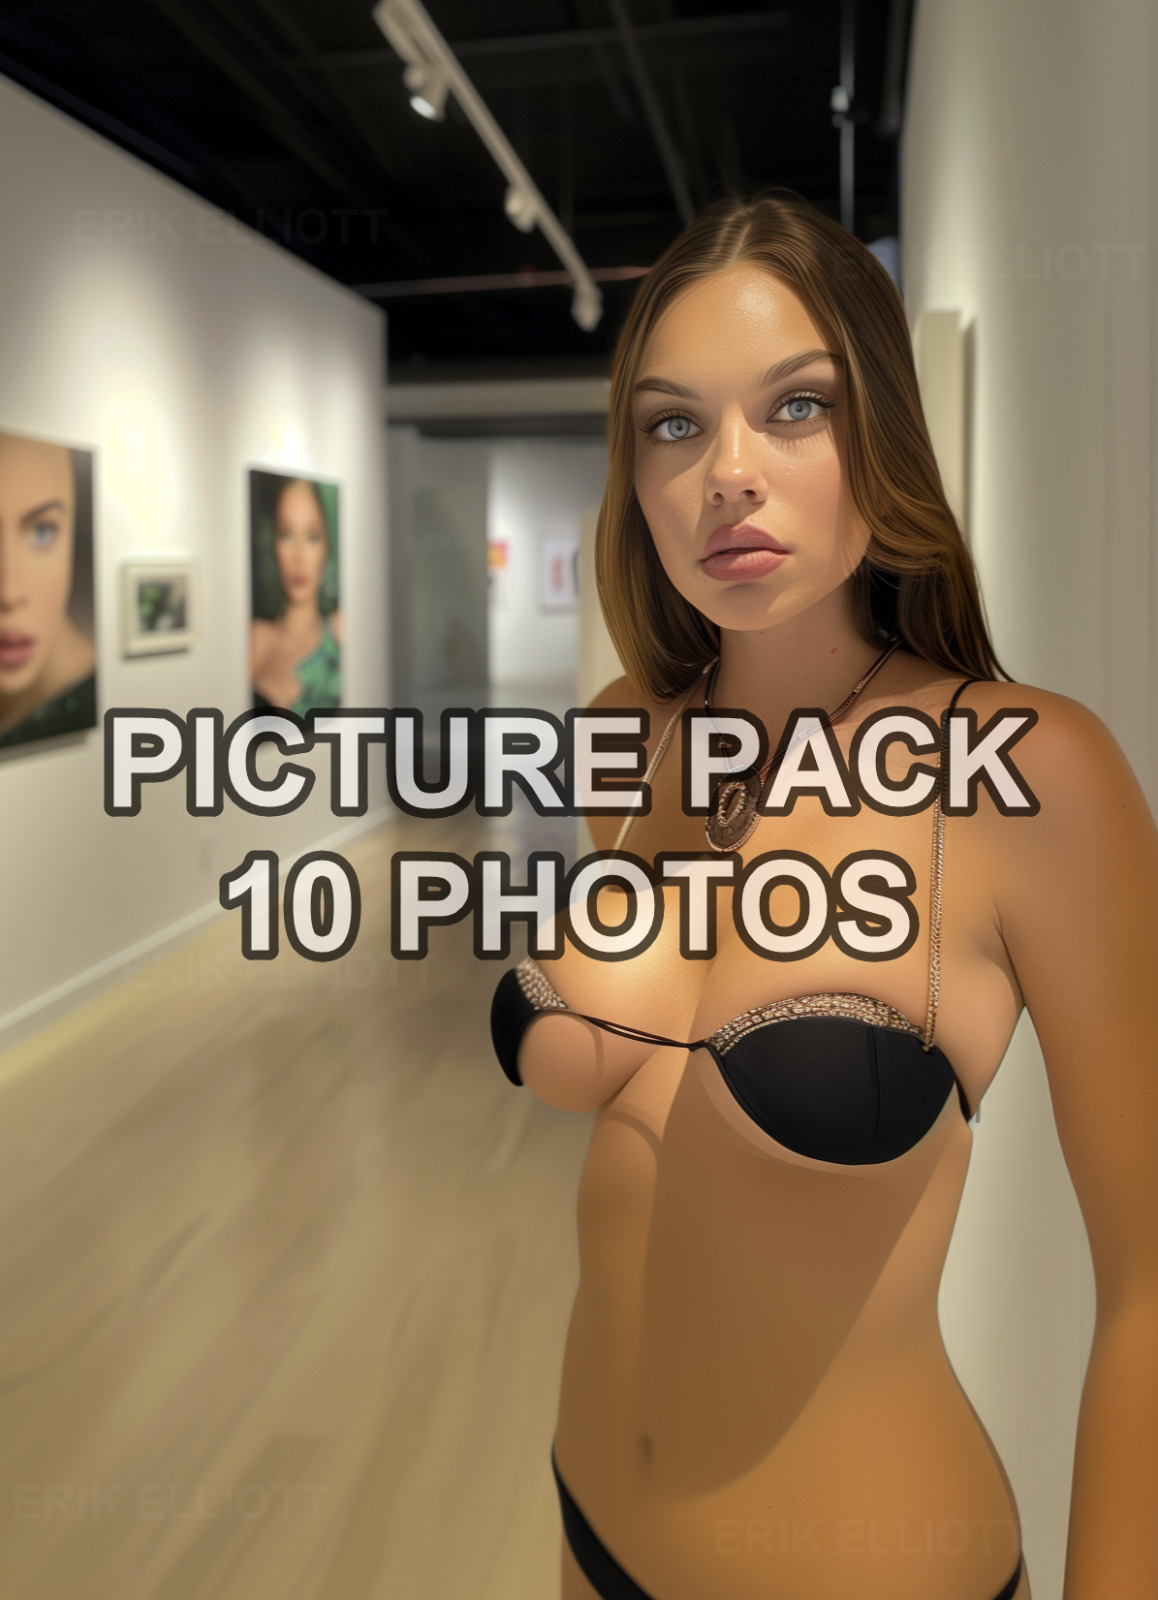 10 PHOTOS 5x7 Sexy Picture Pack Beautiful Women Artwork Photography Hot Girls